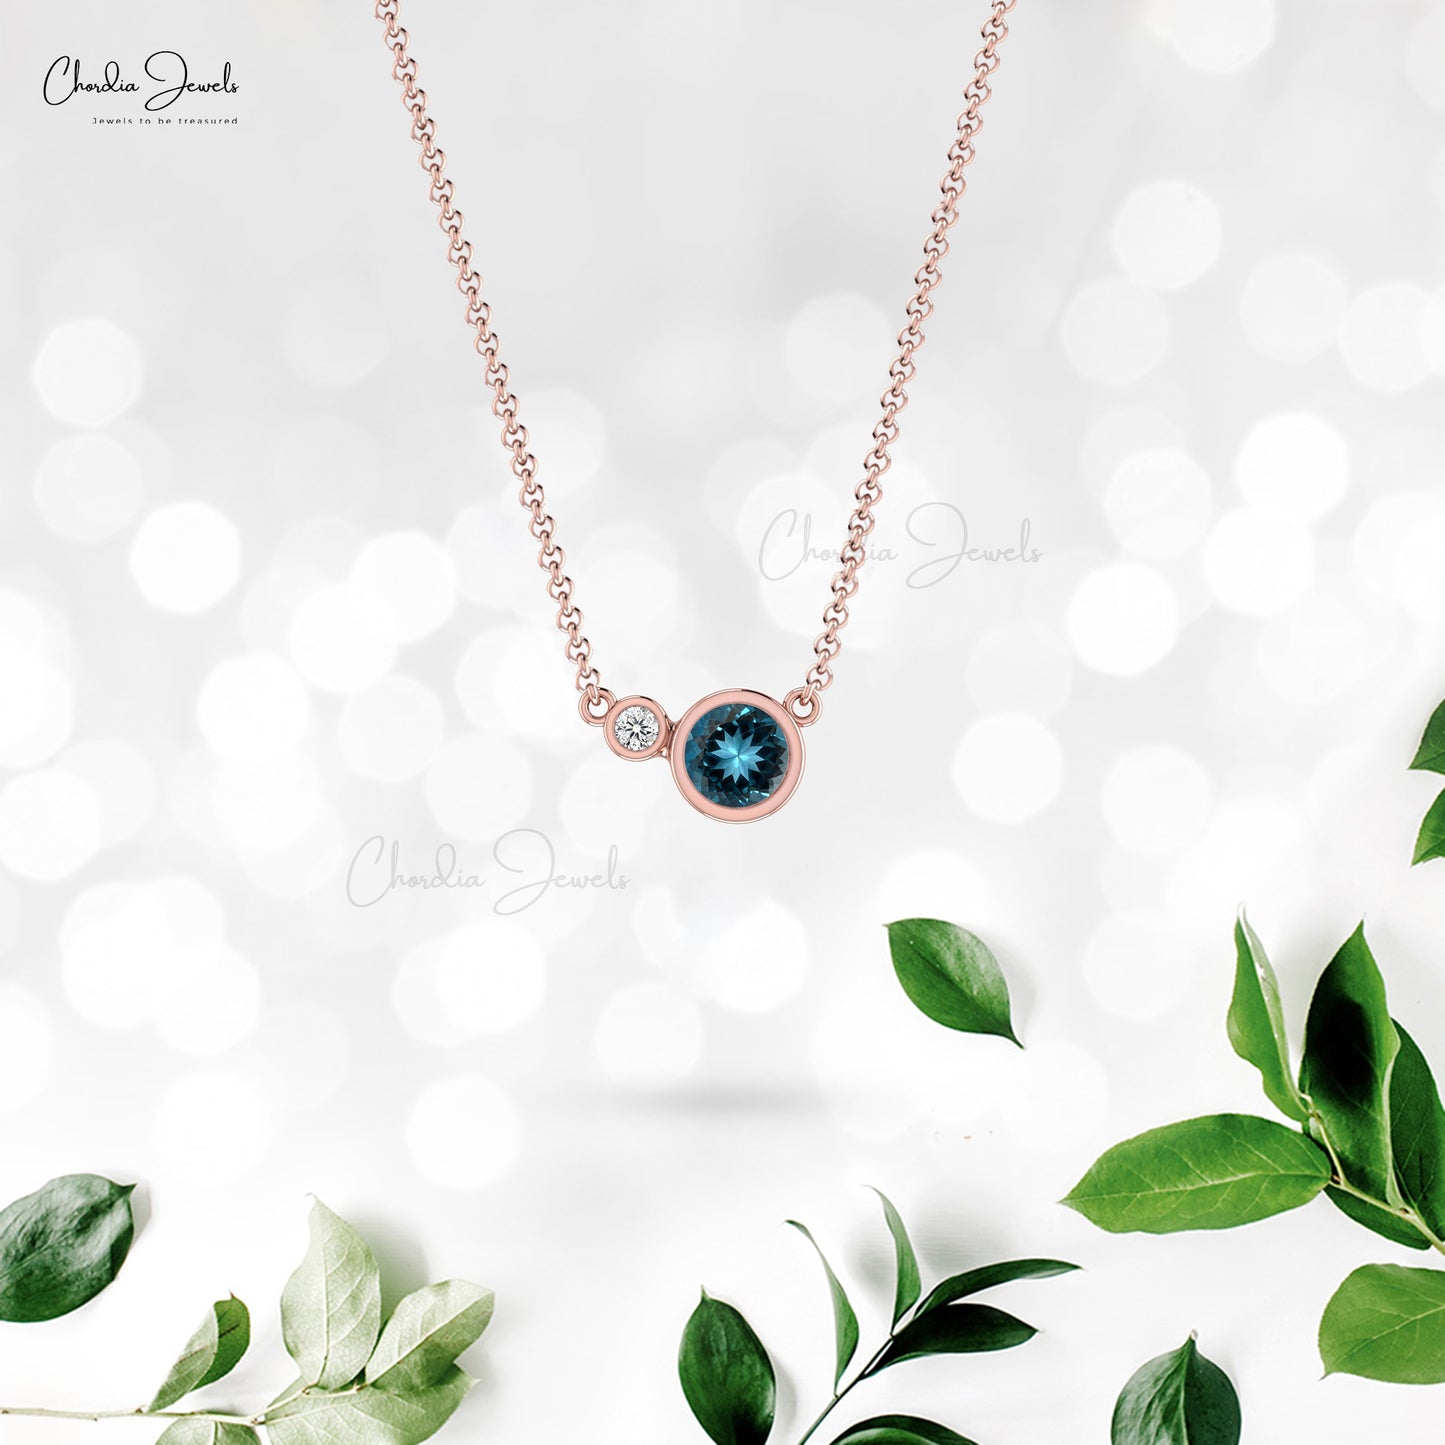 Load image into Gallery viewer, Natural London Blue Topaz Necklace, 5mm Round Faceted Gemstone Necklace, 14k Solid Gold Diamond Necklace Gift for Her
